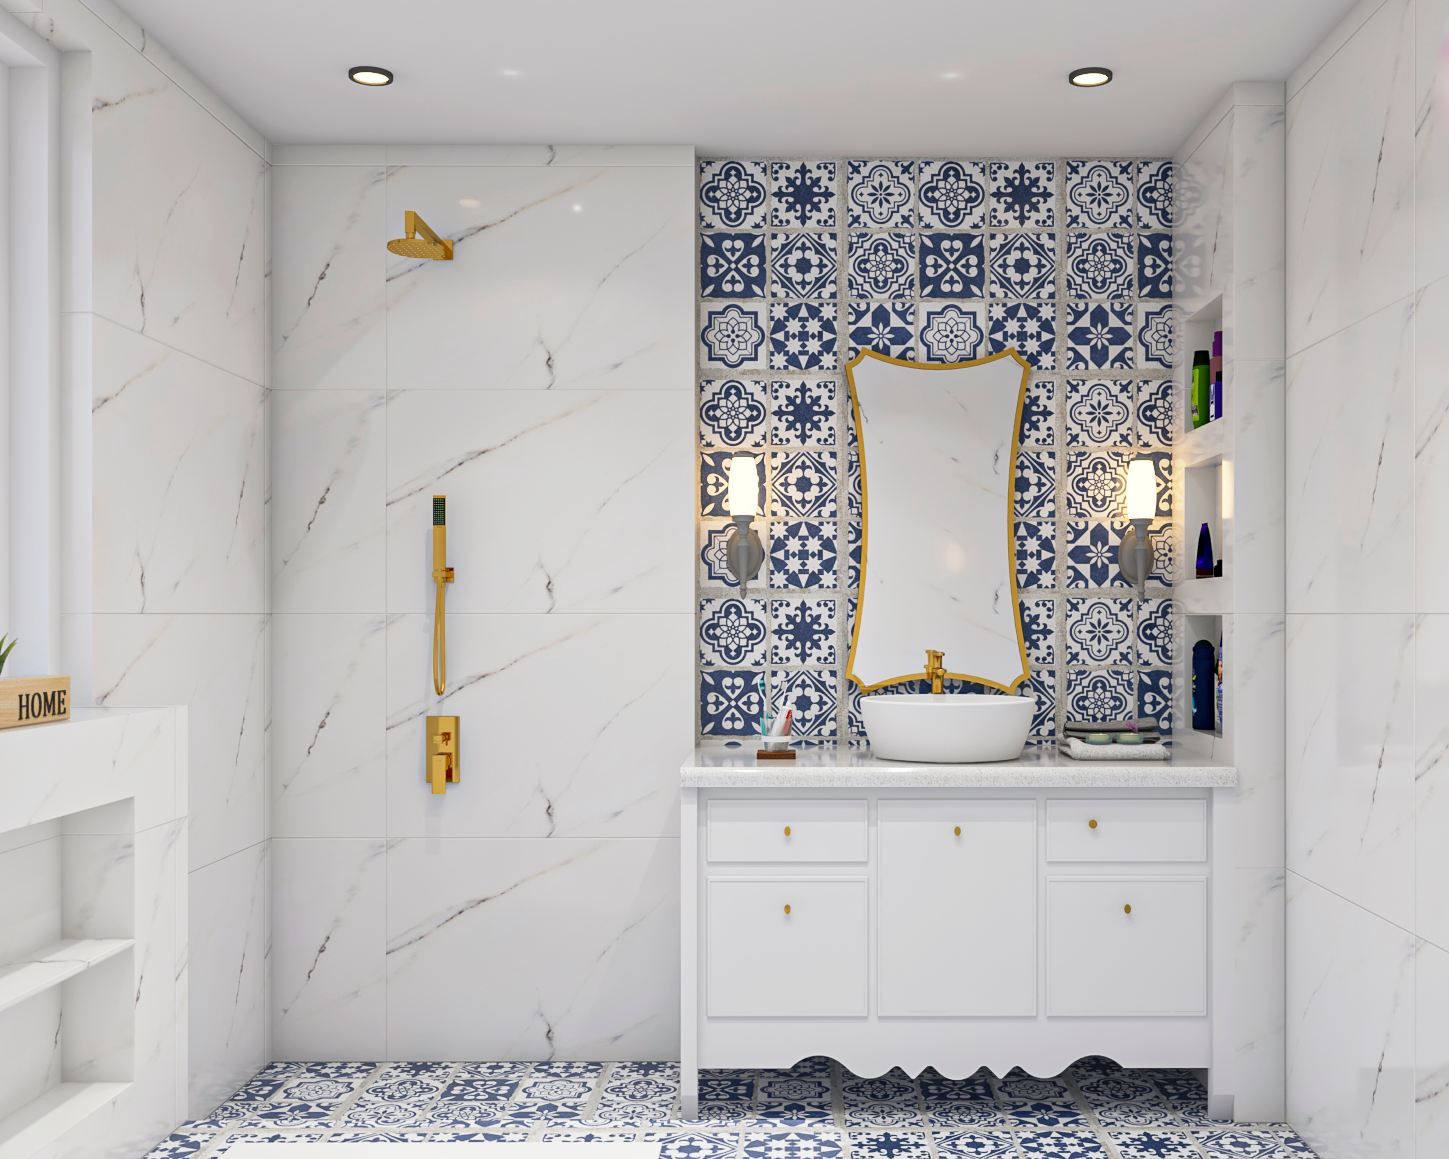 Classic-Styled Convenient Spacious Bathroom Design With Blue Moroccan Tiles